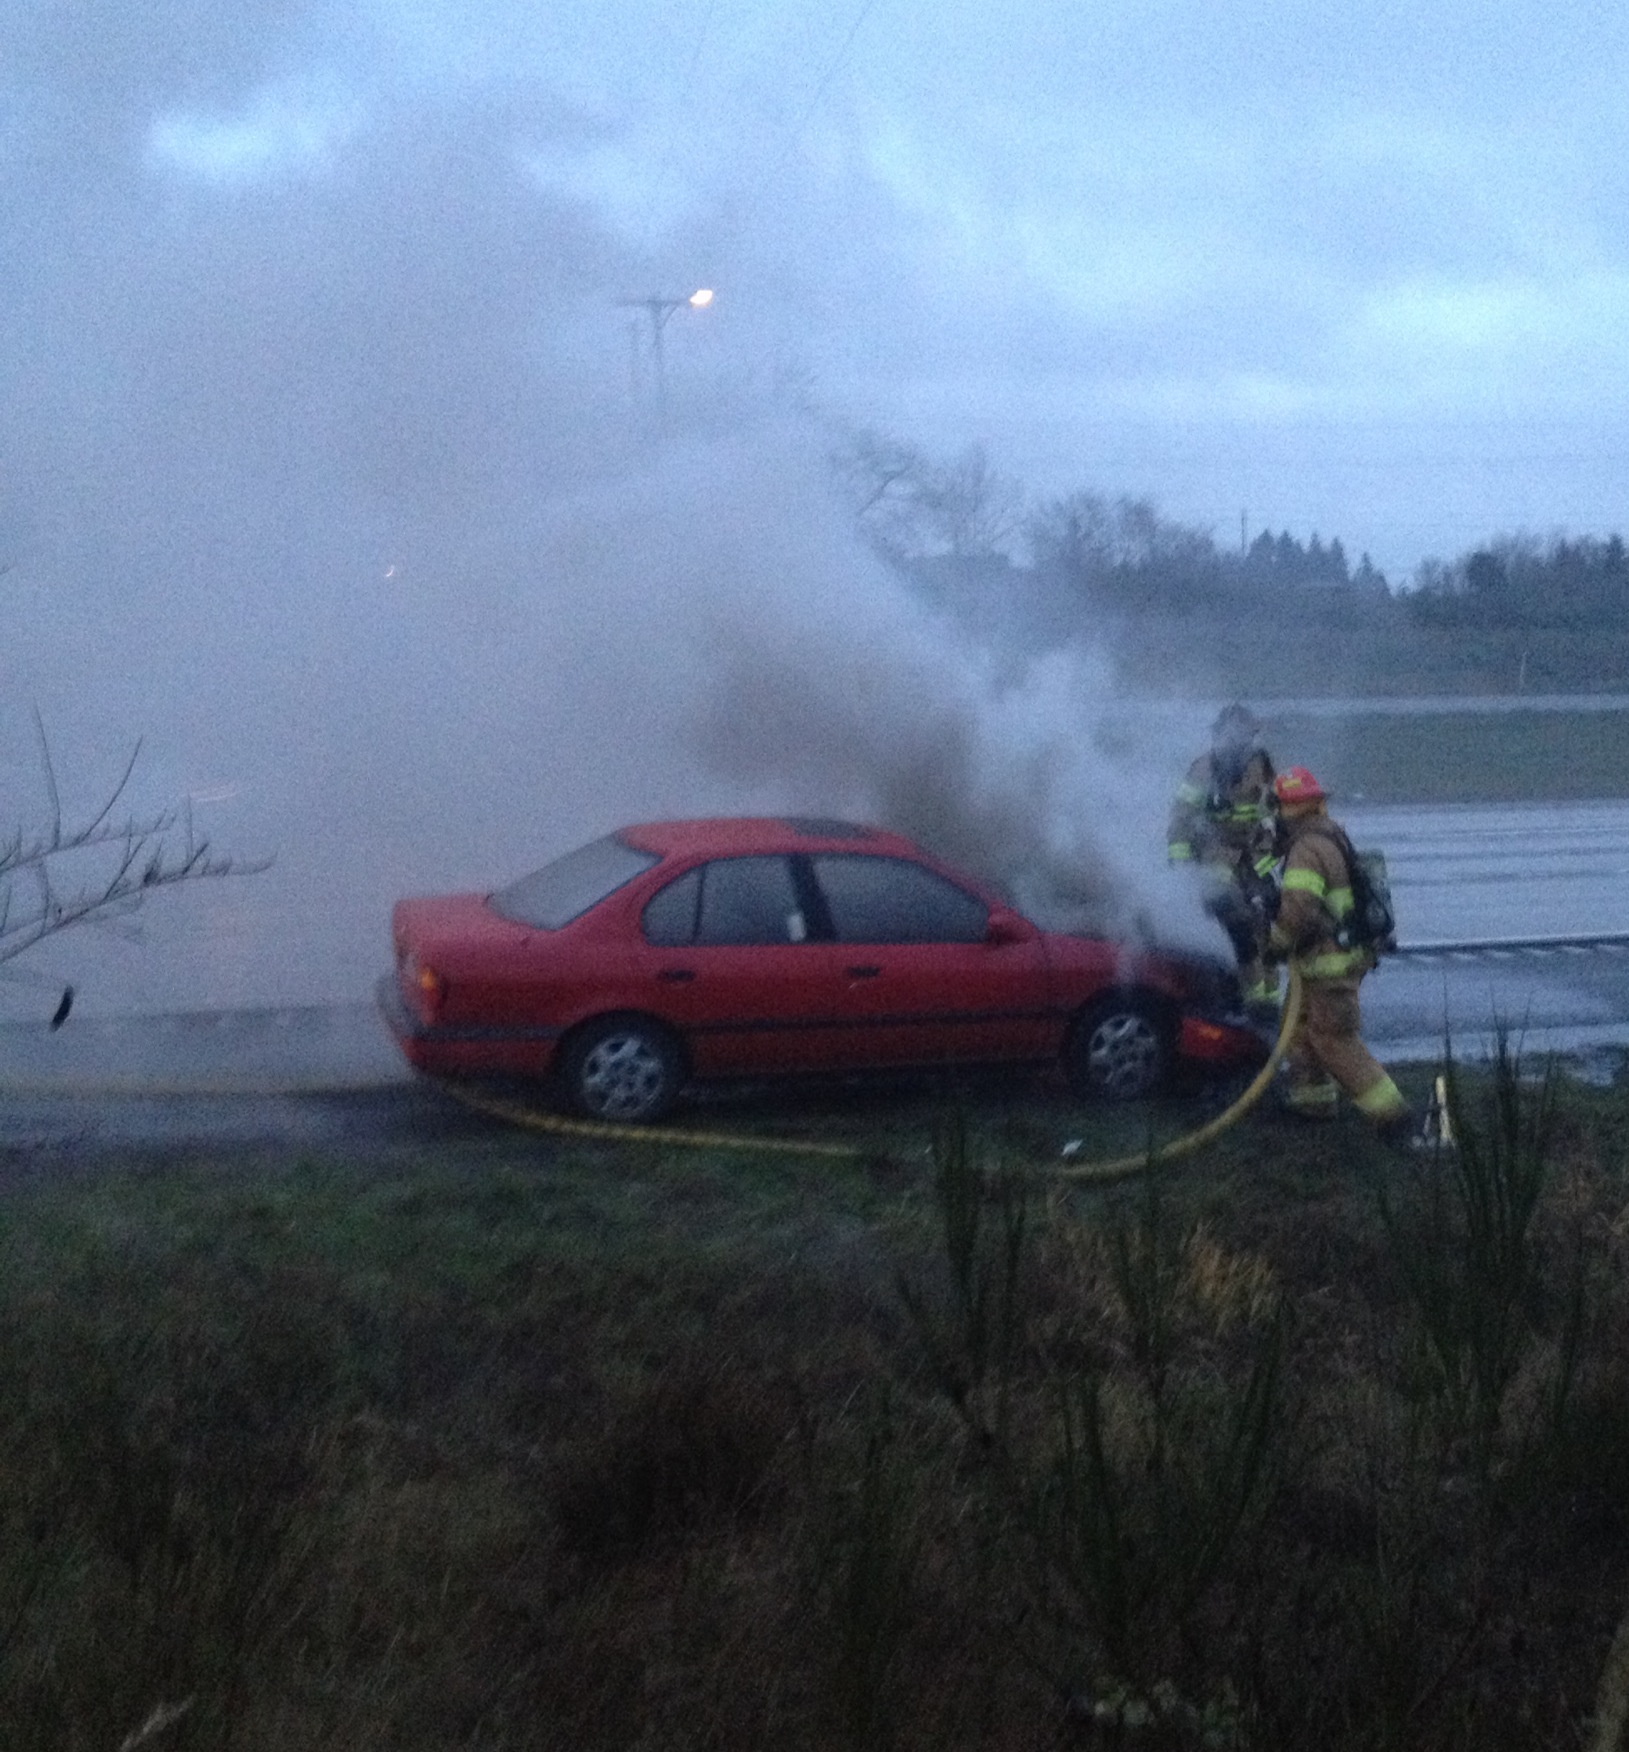 A car fire slowed traffic Monday morning on Interstate 5 southbound near Northeast 179th Street.